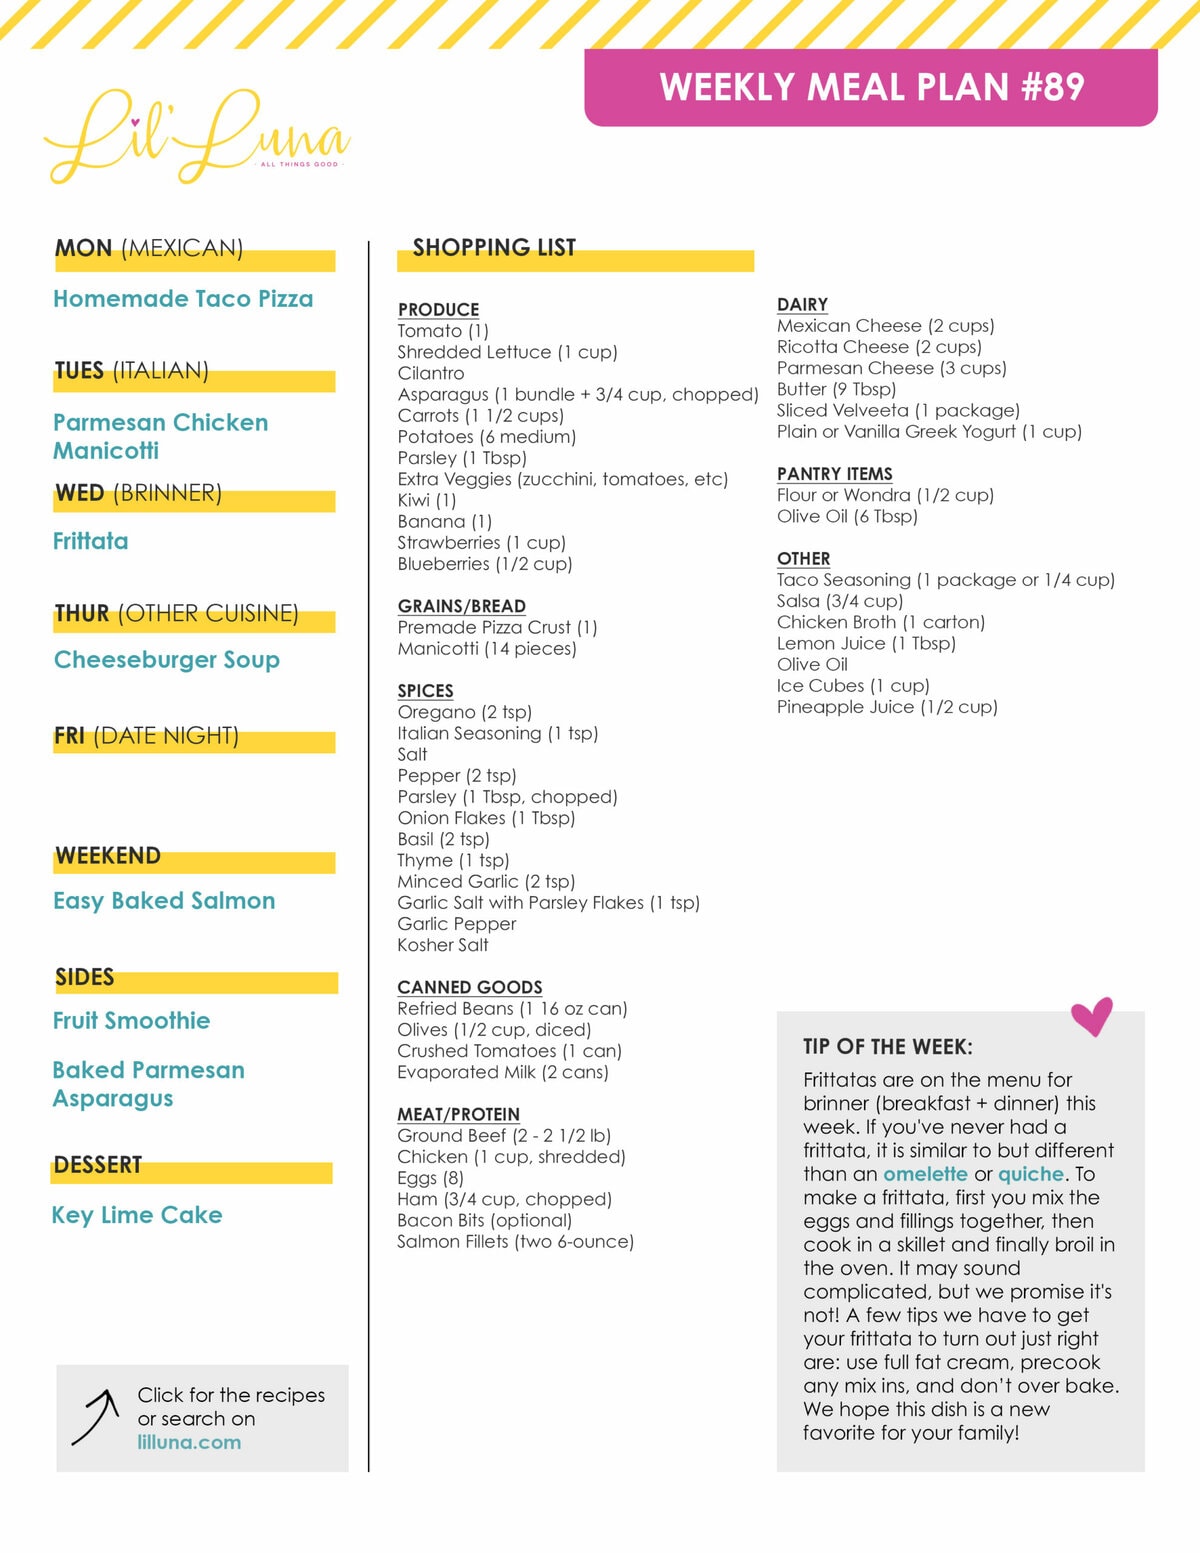 Printable version of Meal Plan #89 with grocery list.